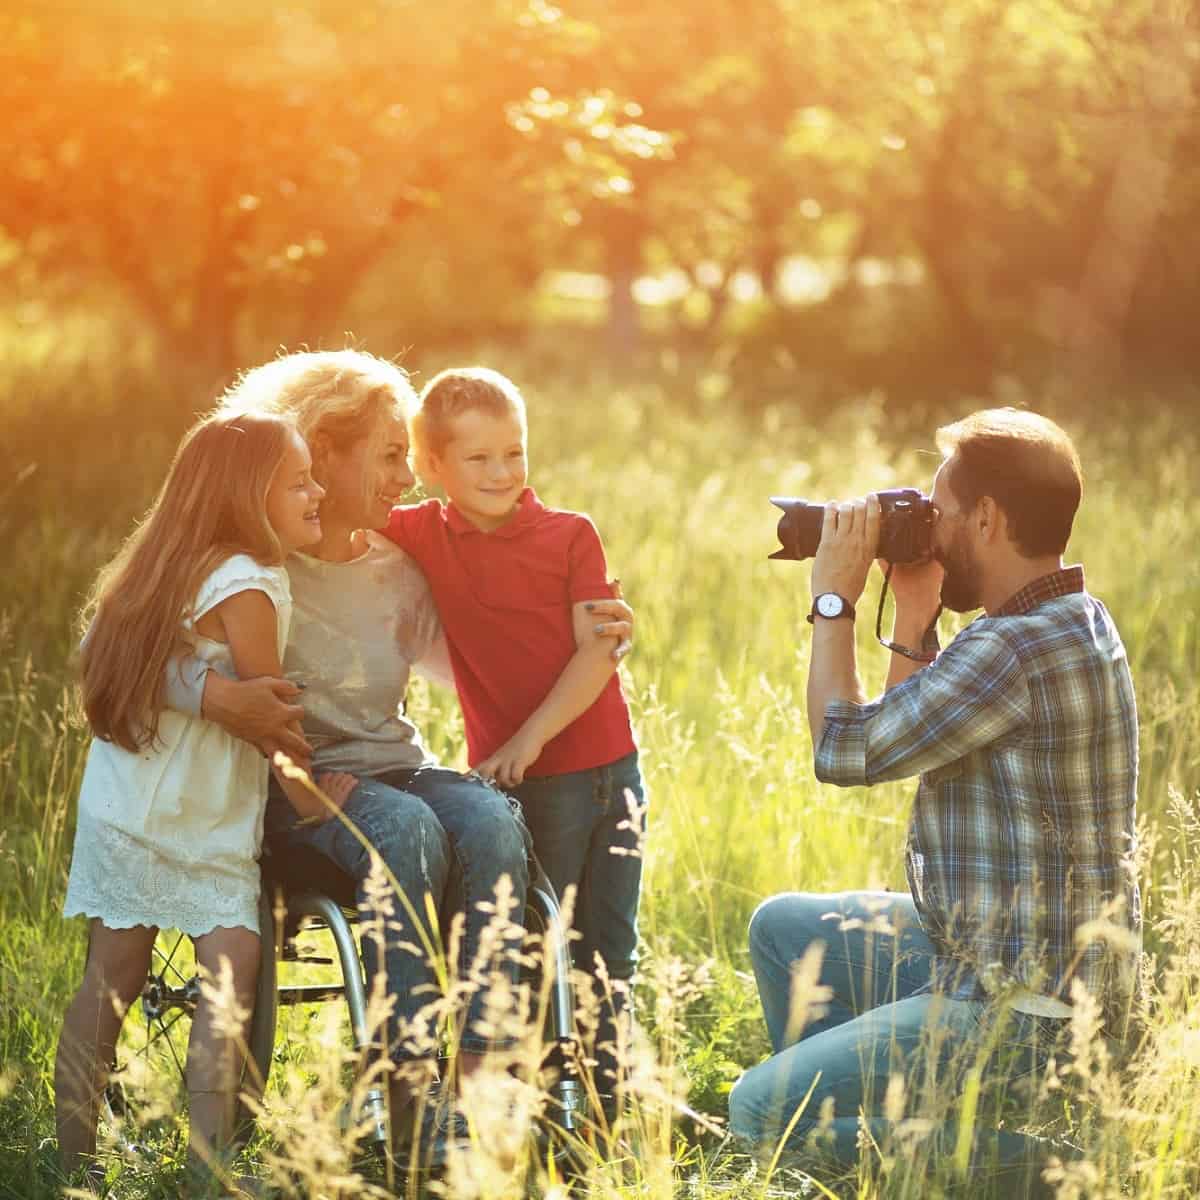 A photographer taking a photo of a family.